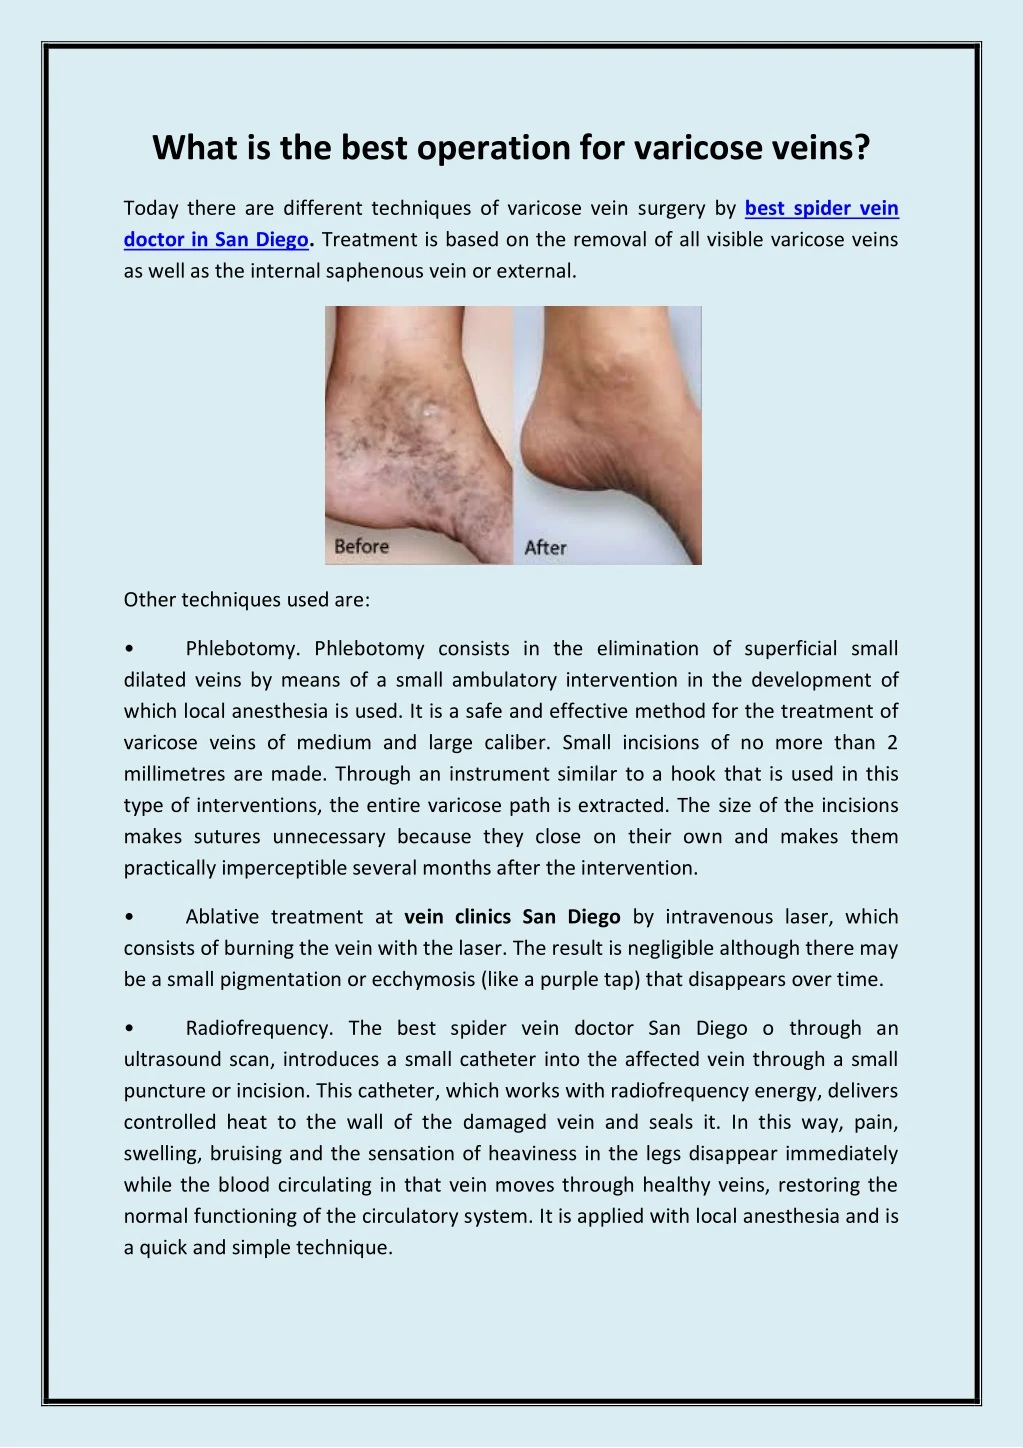 what is the best operation for varicose veins